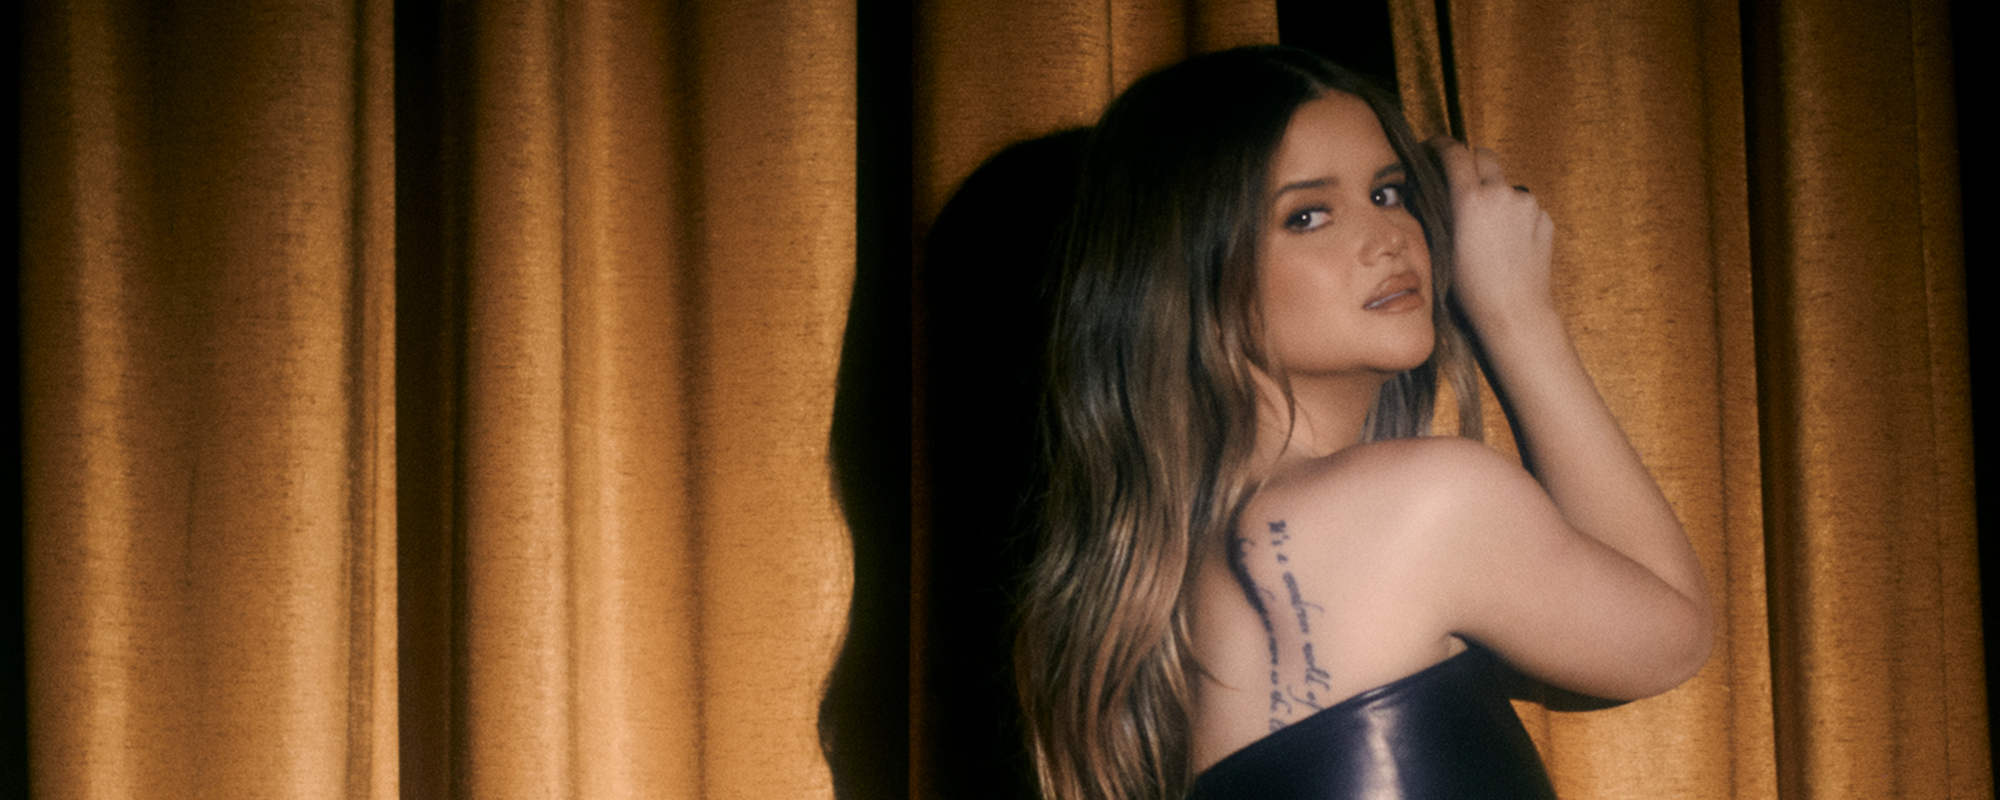 Maren Morris Might Skip CMAs In Light of Brittany Aldean Drama—“I Don’t Feel Comfortable Going”